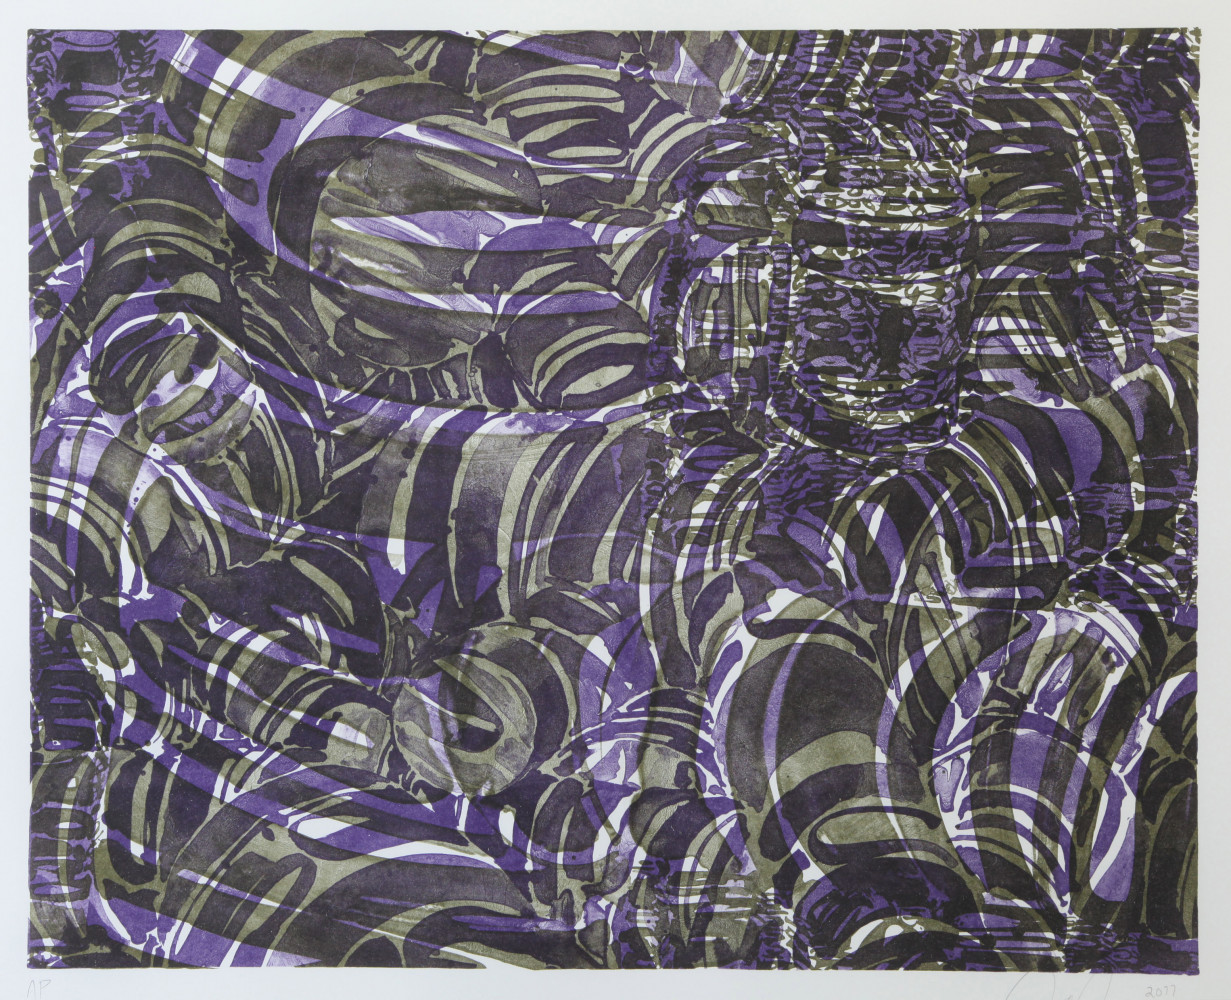 Tony Cragg, ‘Waldzimmer’, 2011, multicolored lithography